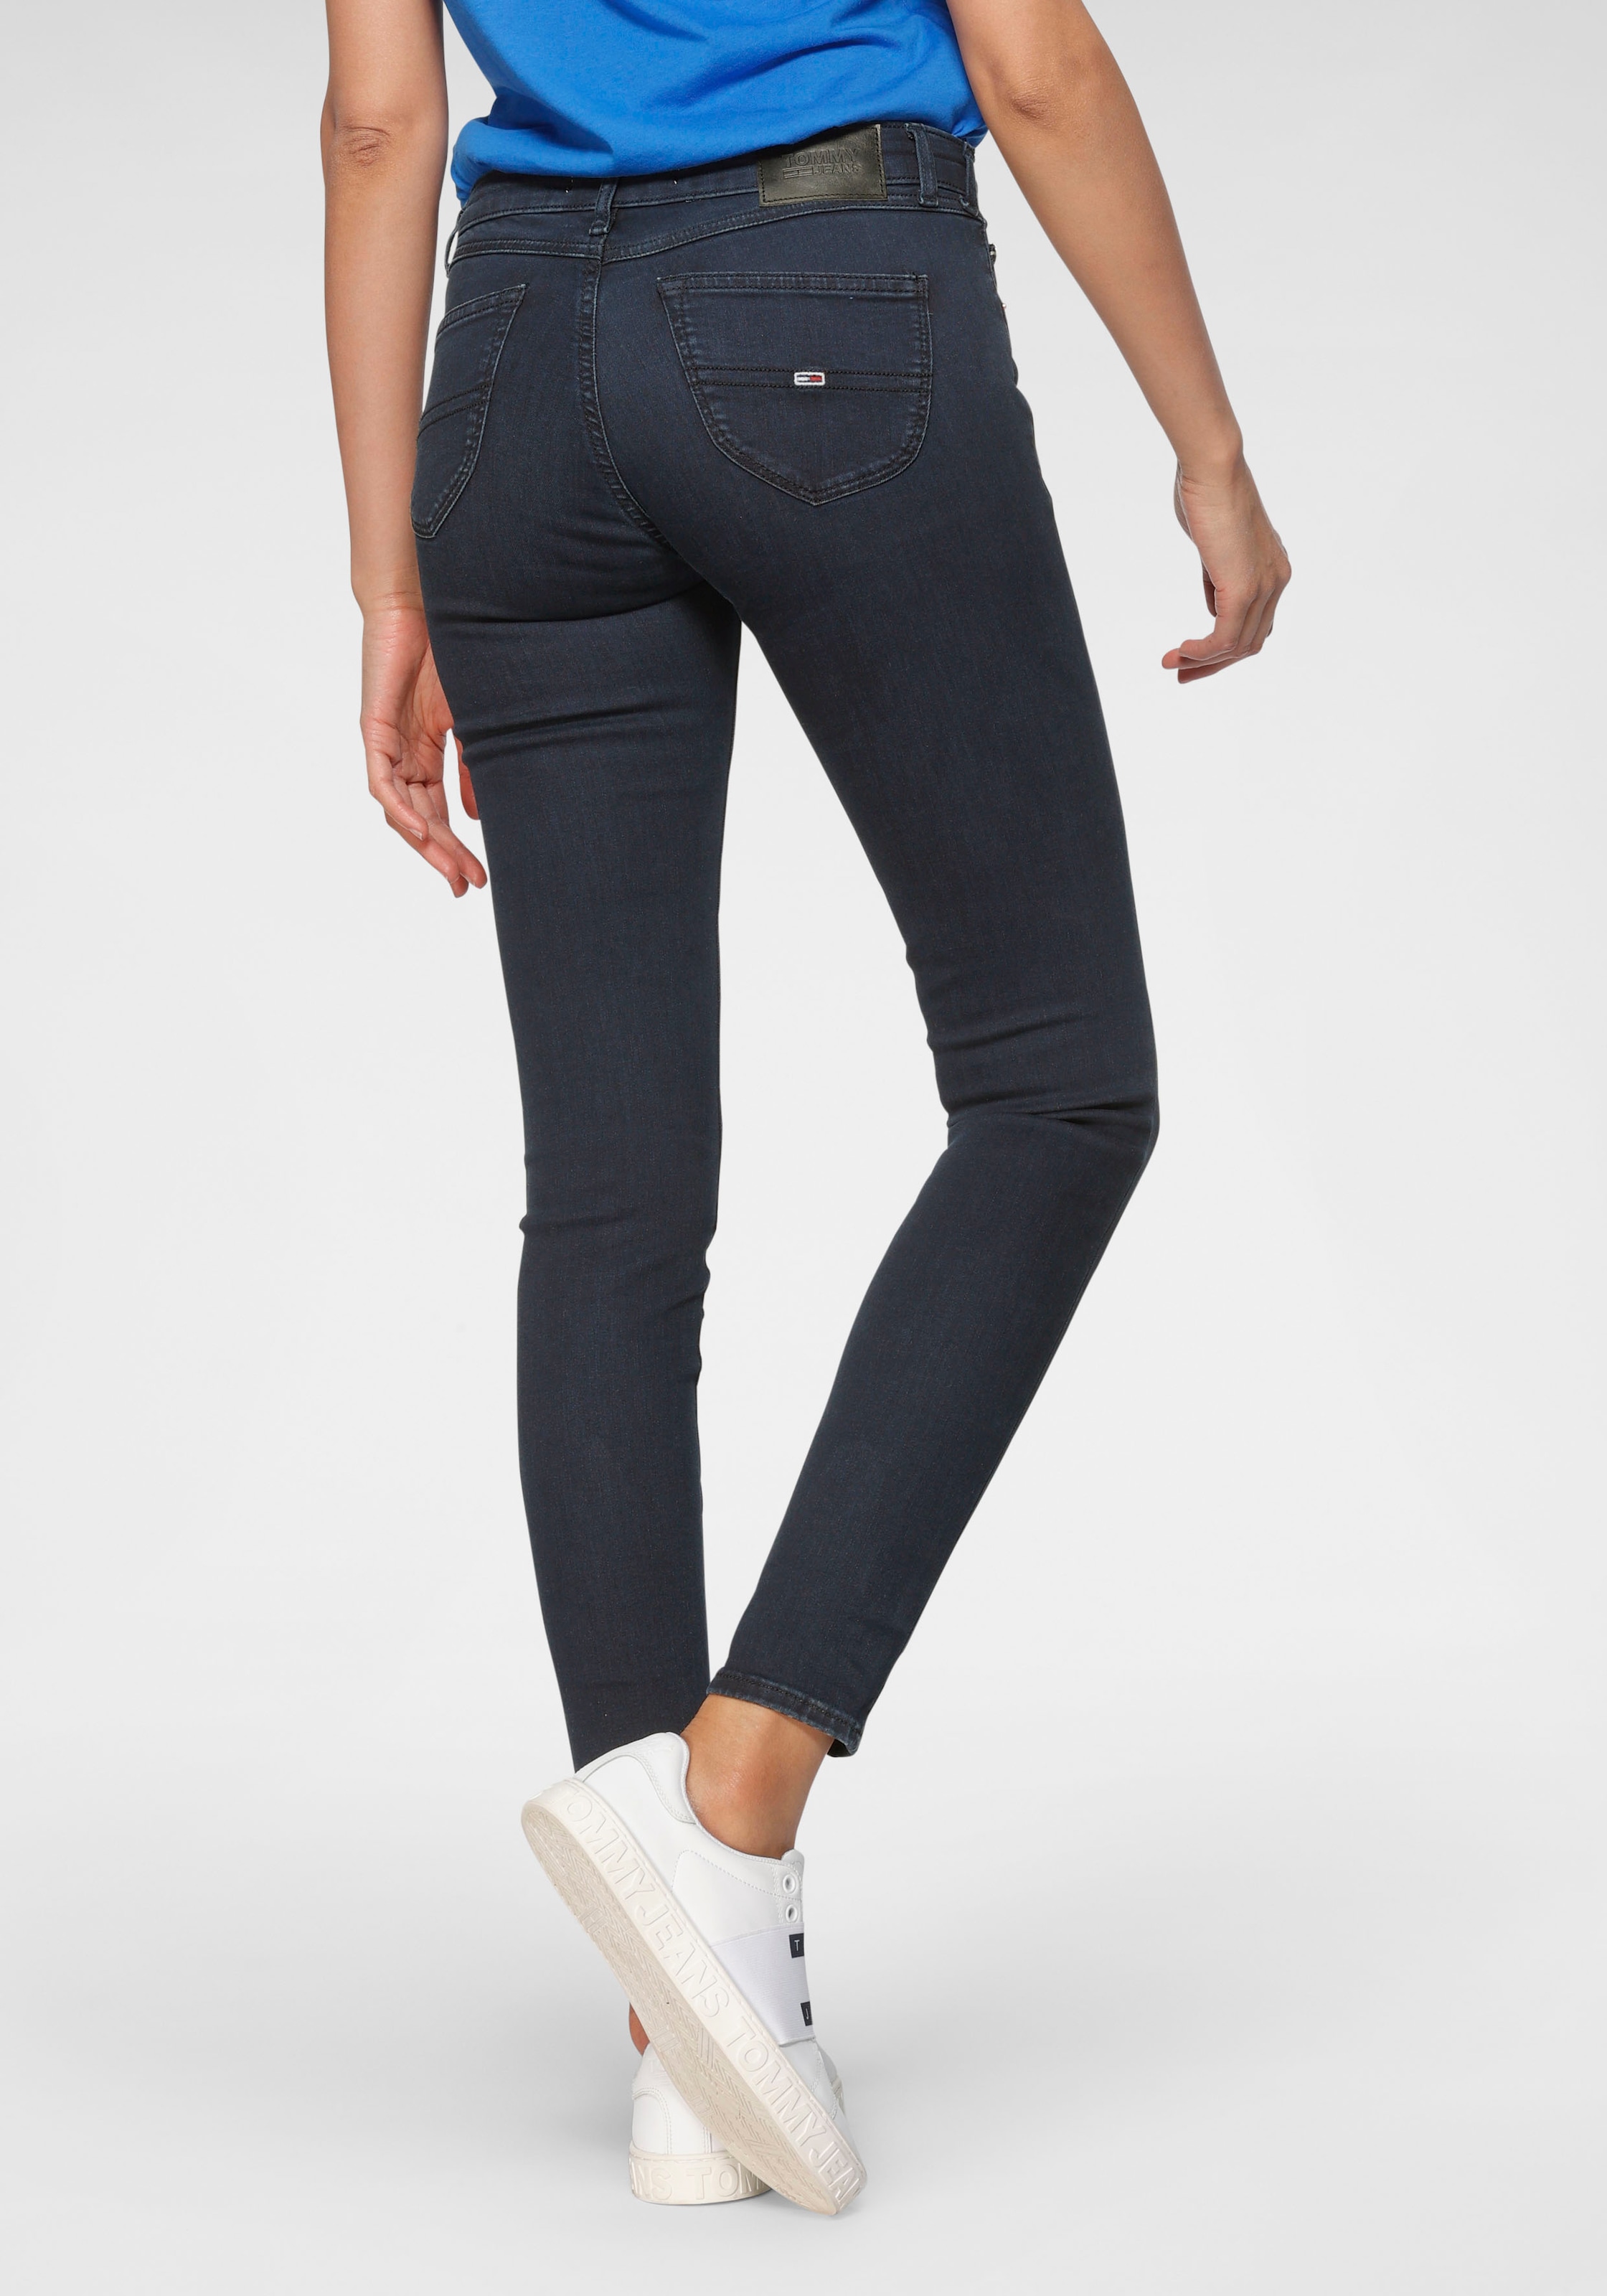 bei Stretch, Shaping für Skinny-fit-Jeans, mit ♕ Jeans Tommy perfektes